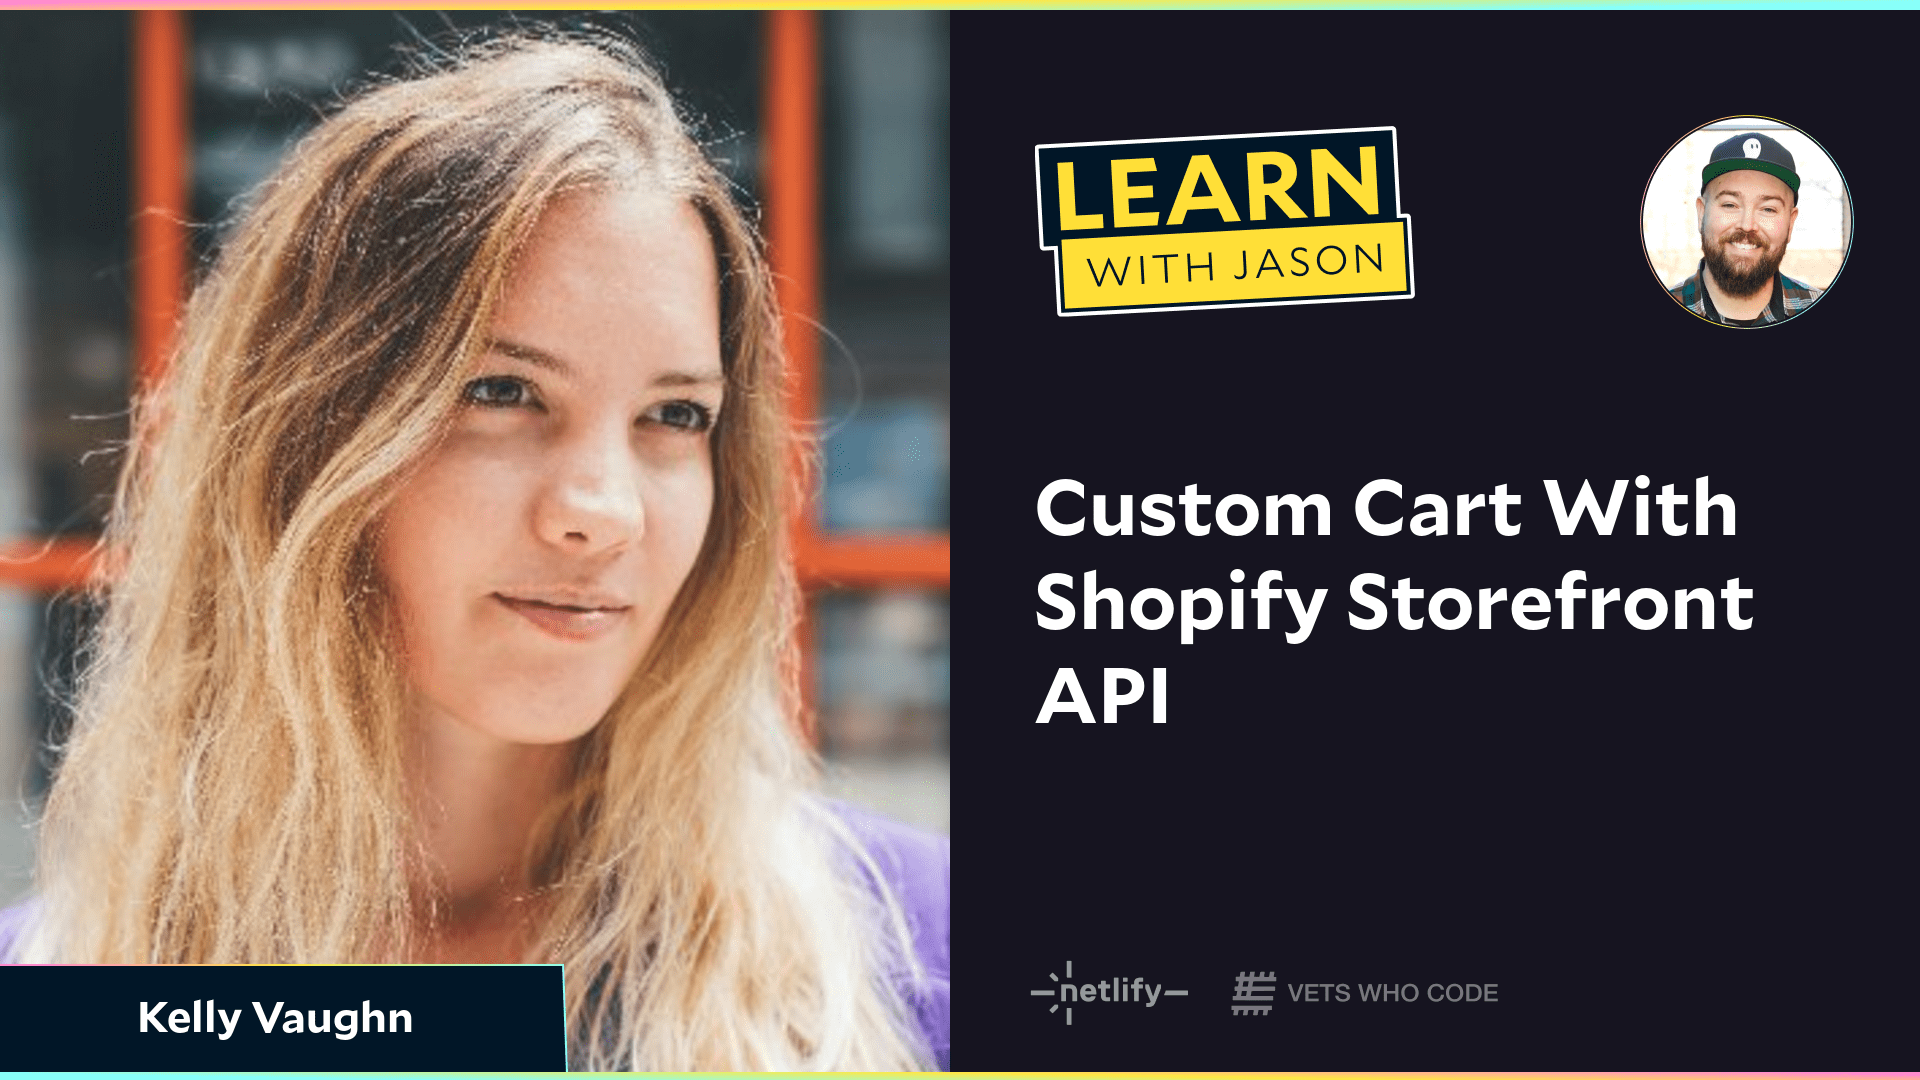 Custom Cart With Shopify Storefront API (with Kelly Vaughn)